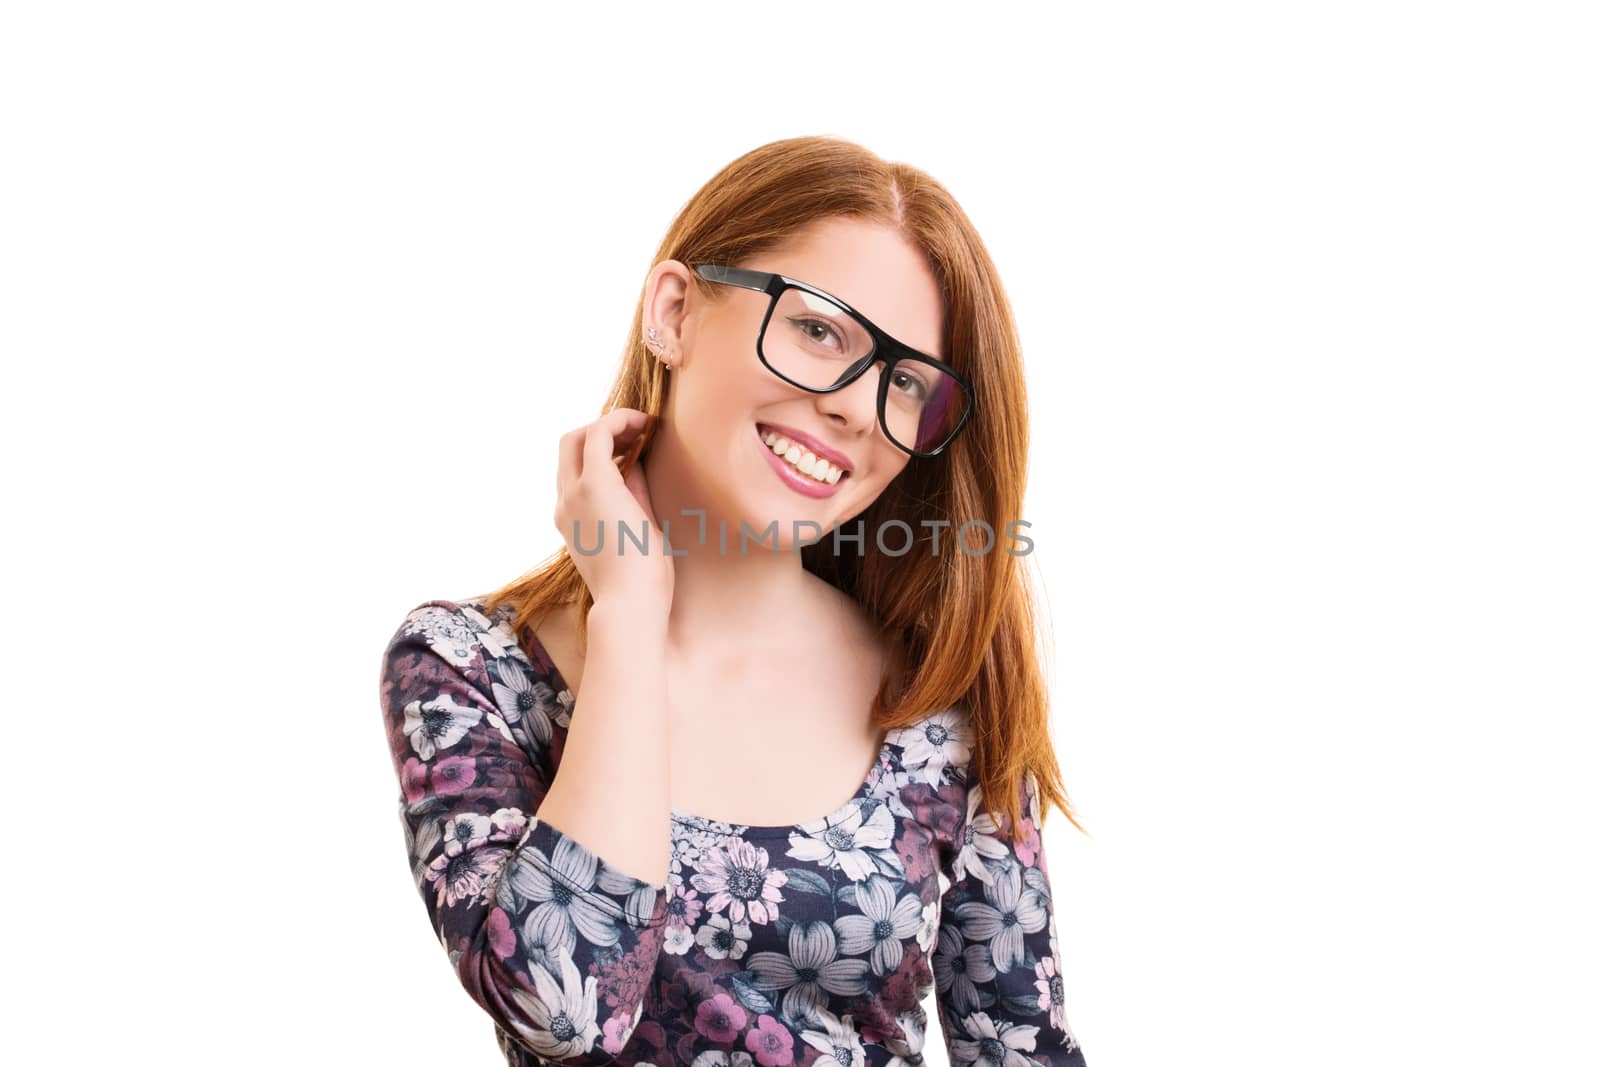 Portrait of a beautiful smiling young hipster girl in colorful casual clothes with glasses, looking timidly into the camera, isolated on white background.